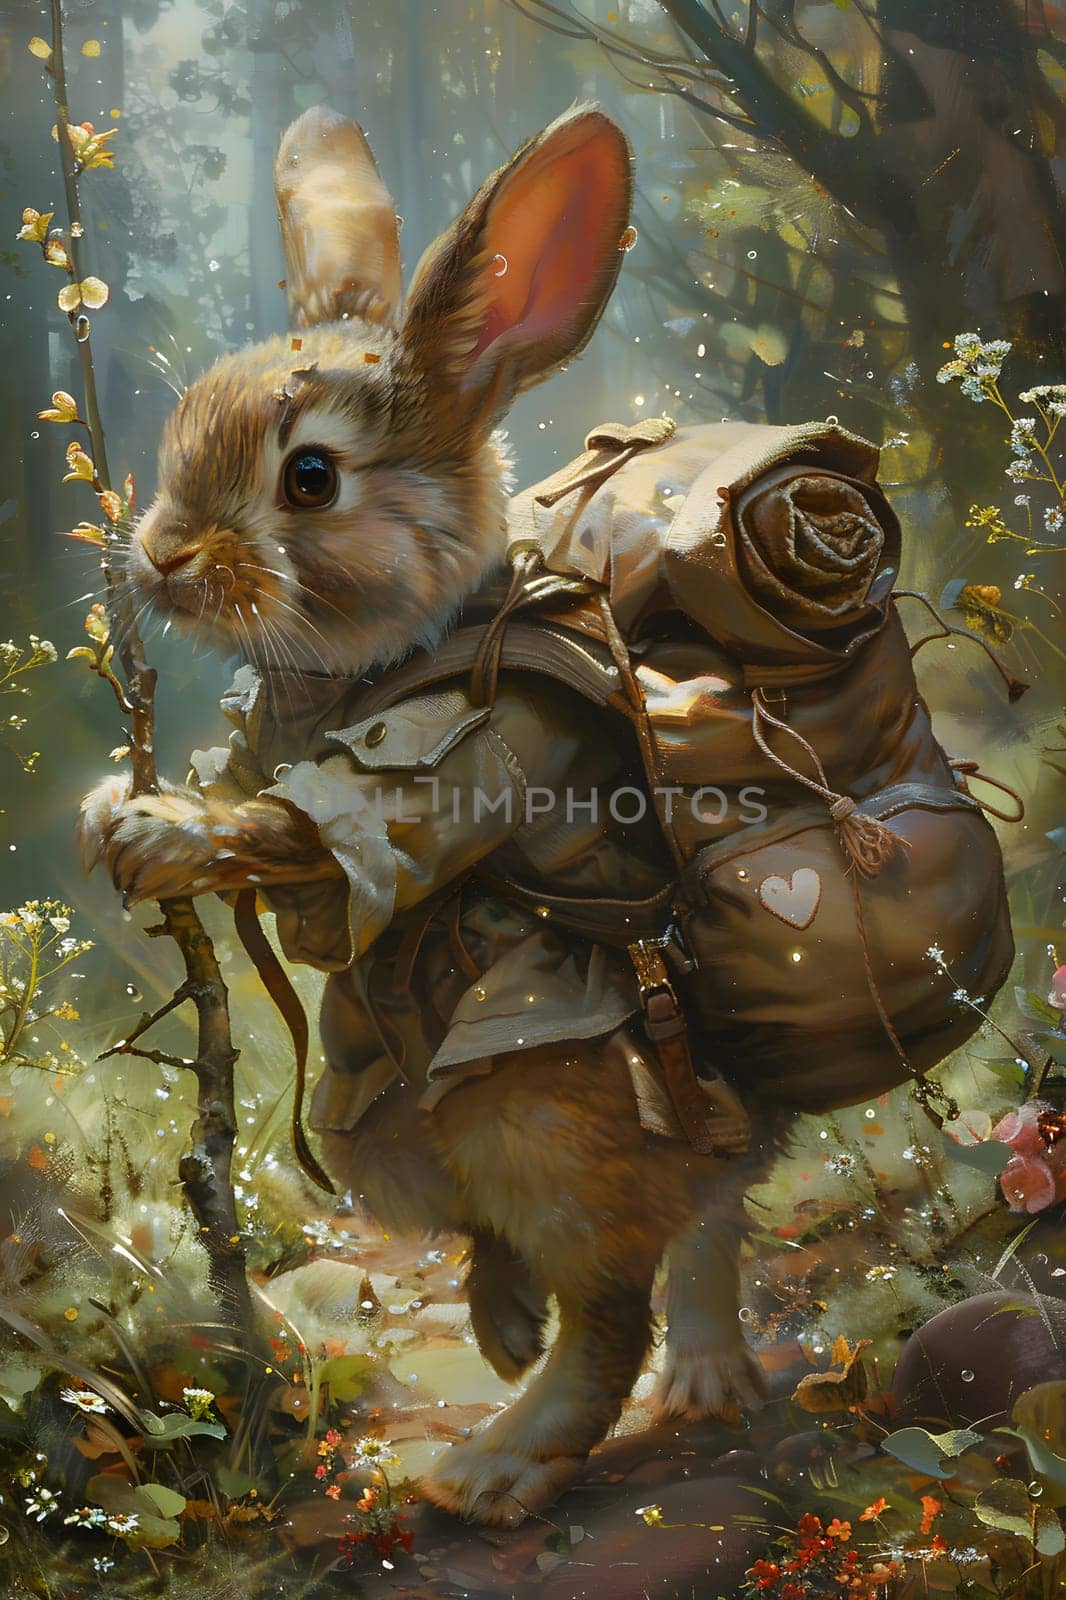 A rabbit with a backpack and stick in an art piece by Nadtochiy